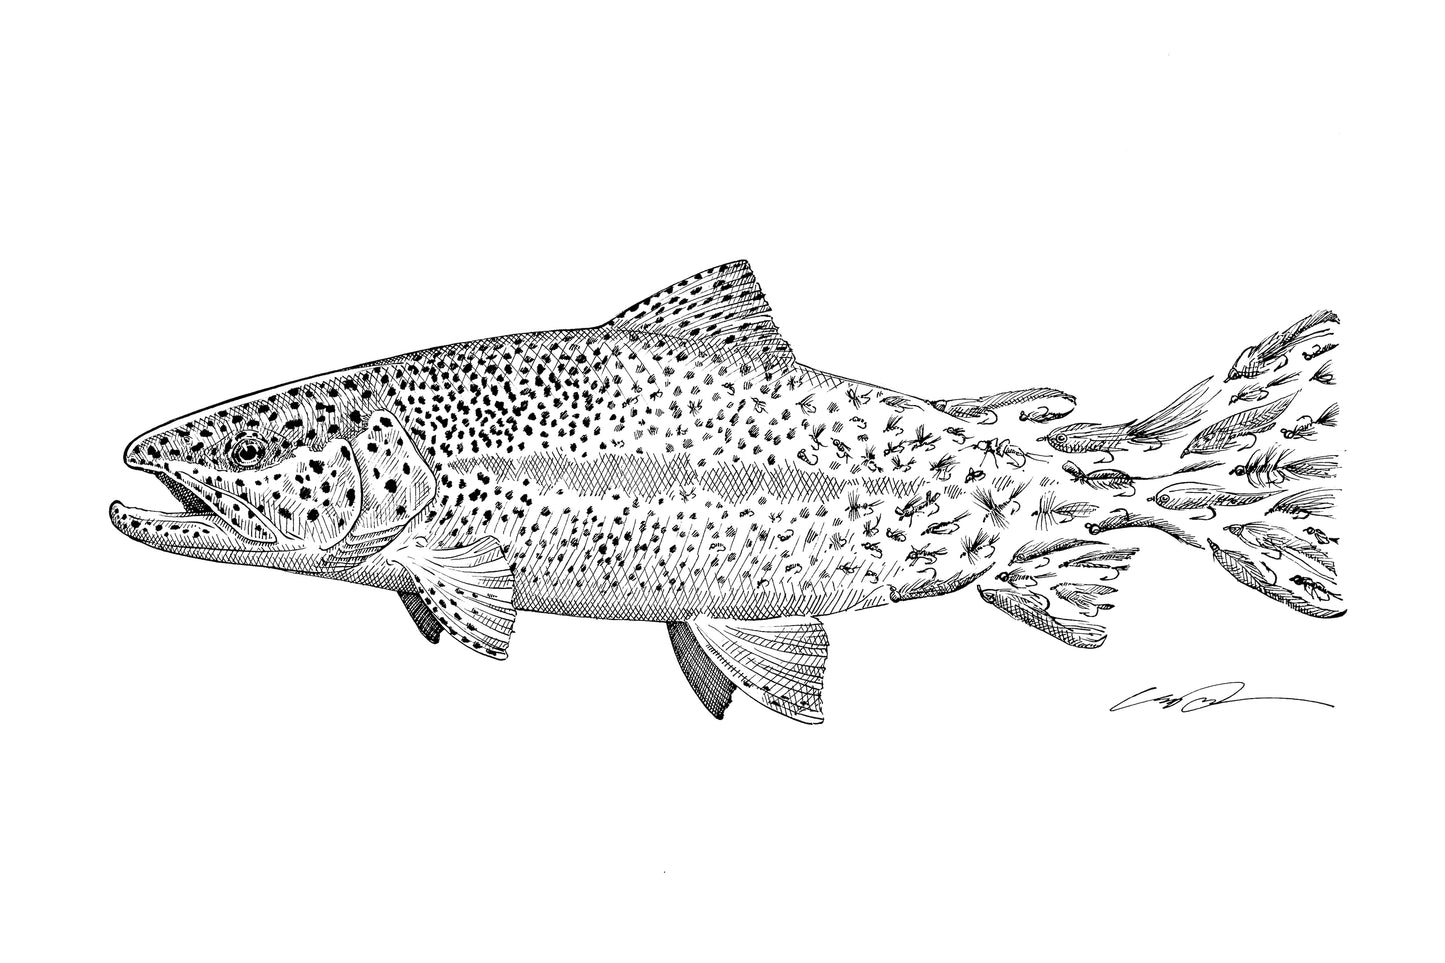 A pen and ink drawing of a rainbow trout where the trout's spots fade into flies to form the tail of the fish.